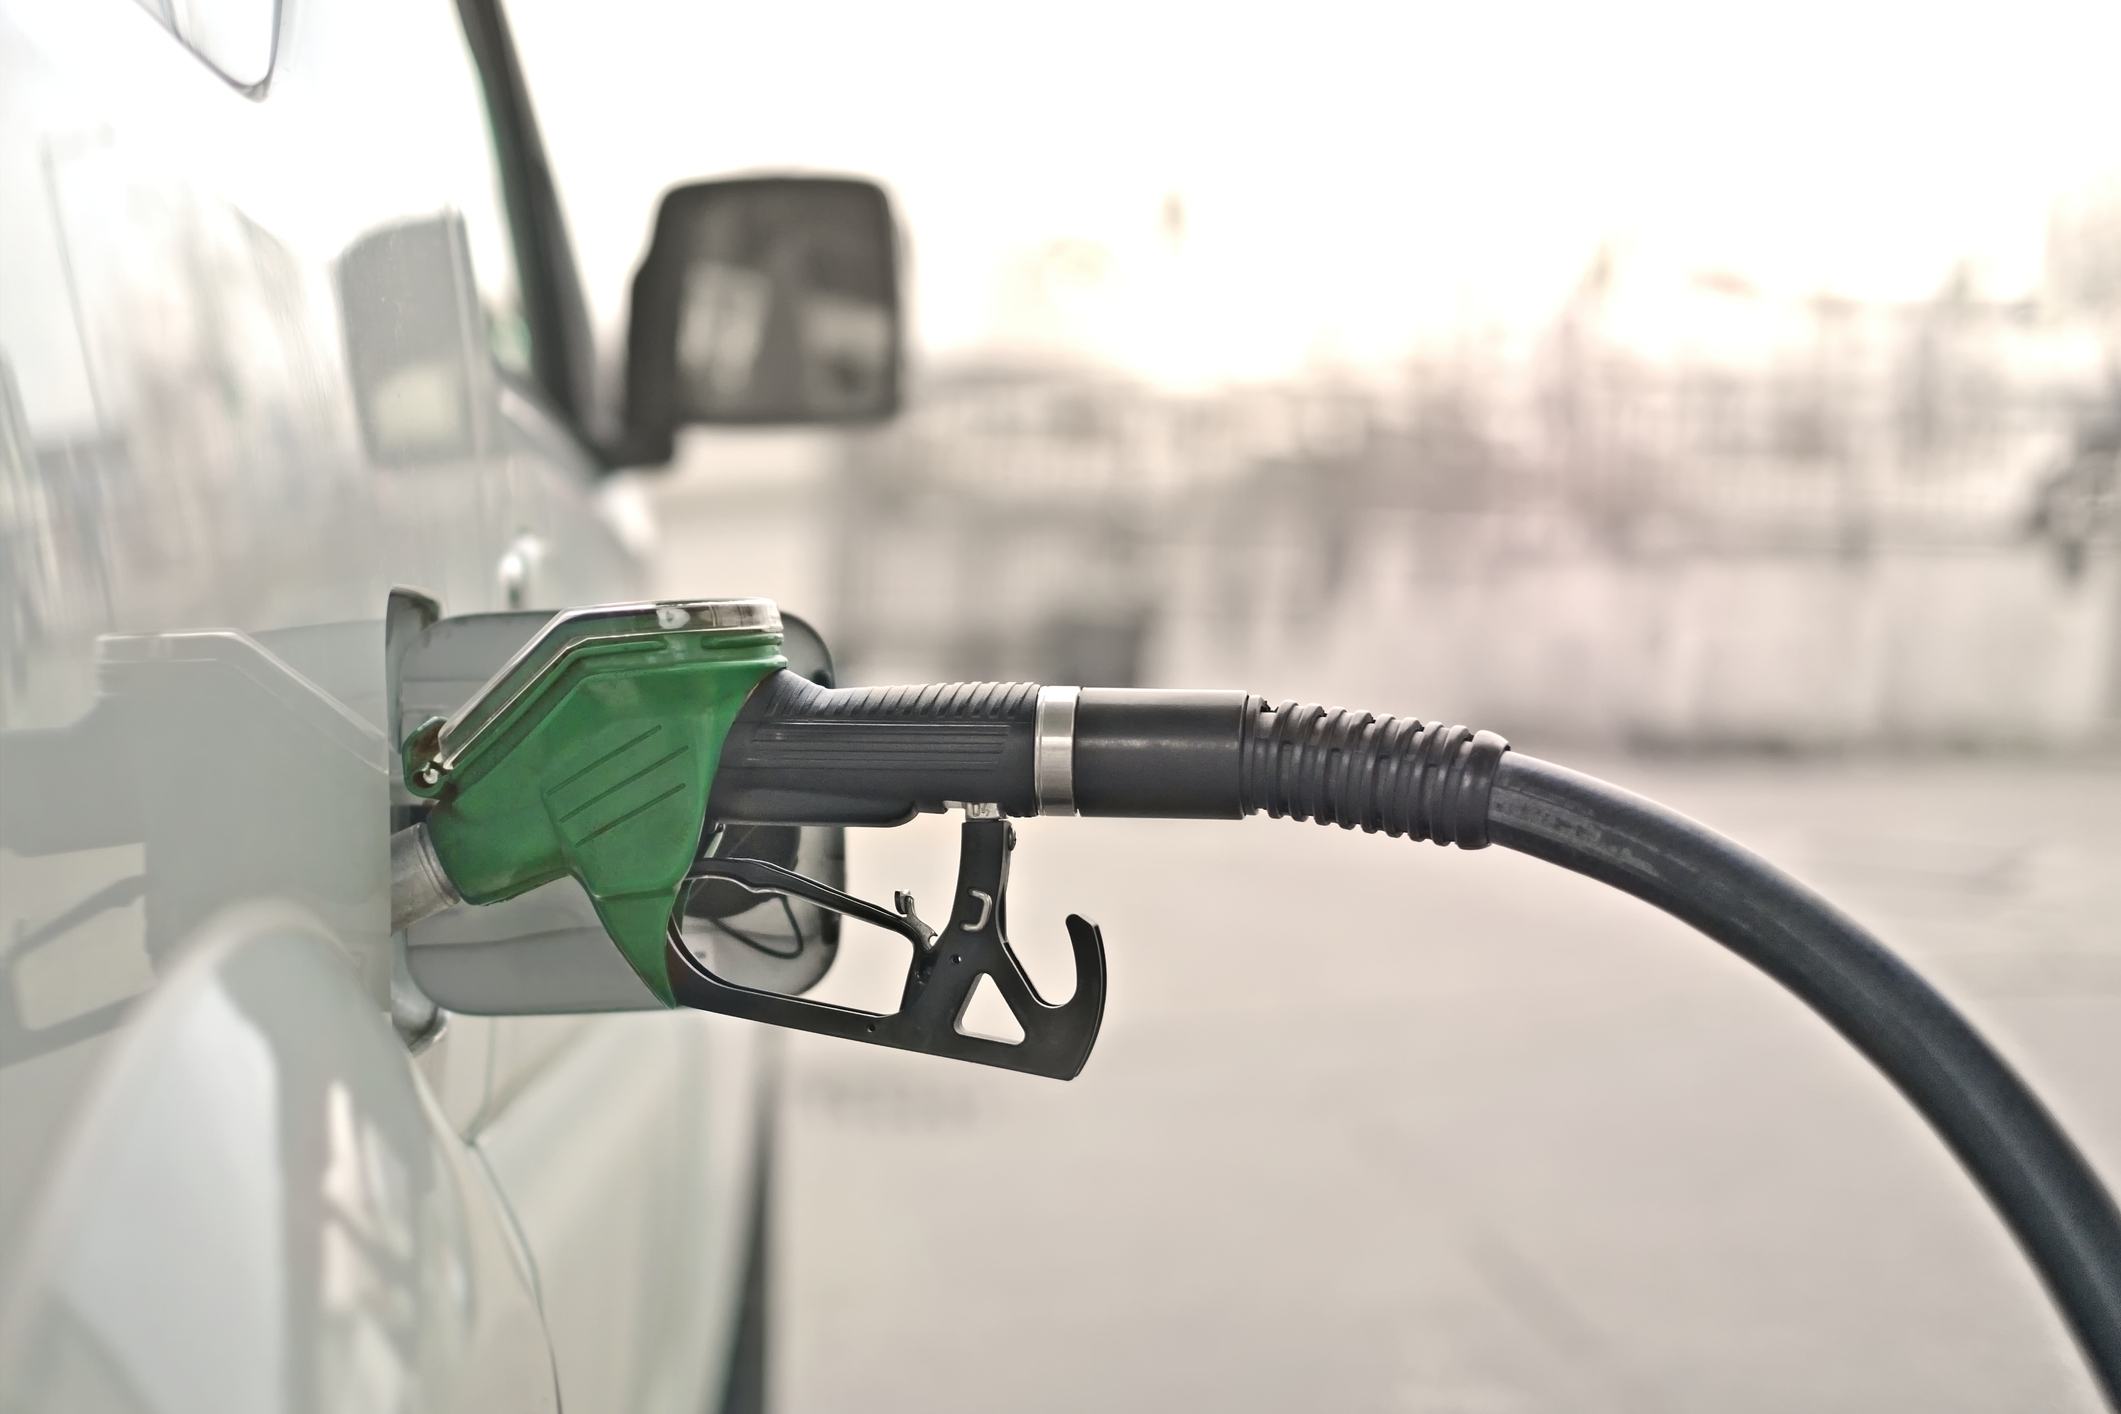 Refilling an car with fuel at the gas station. (Photo: iStock - Lightspruch)